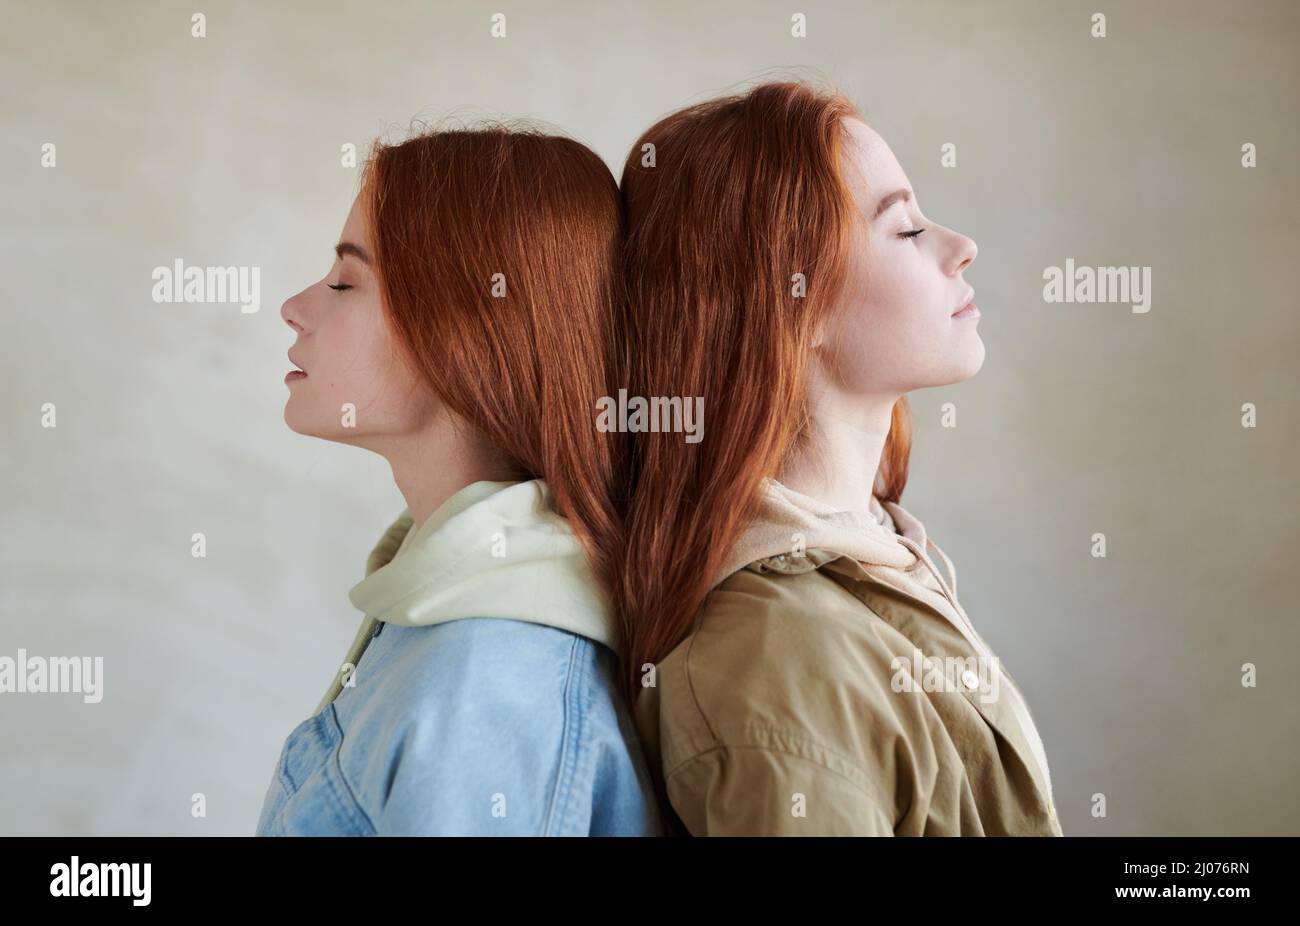 Medium close-up side view studio portrait of two beautful red-haired sisters standing with eyes closed head to head Stock Photo